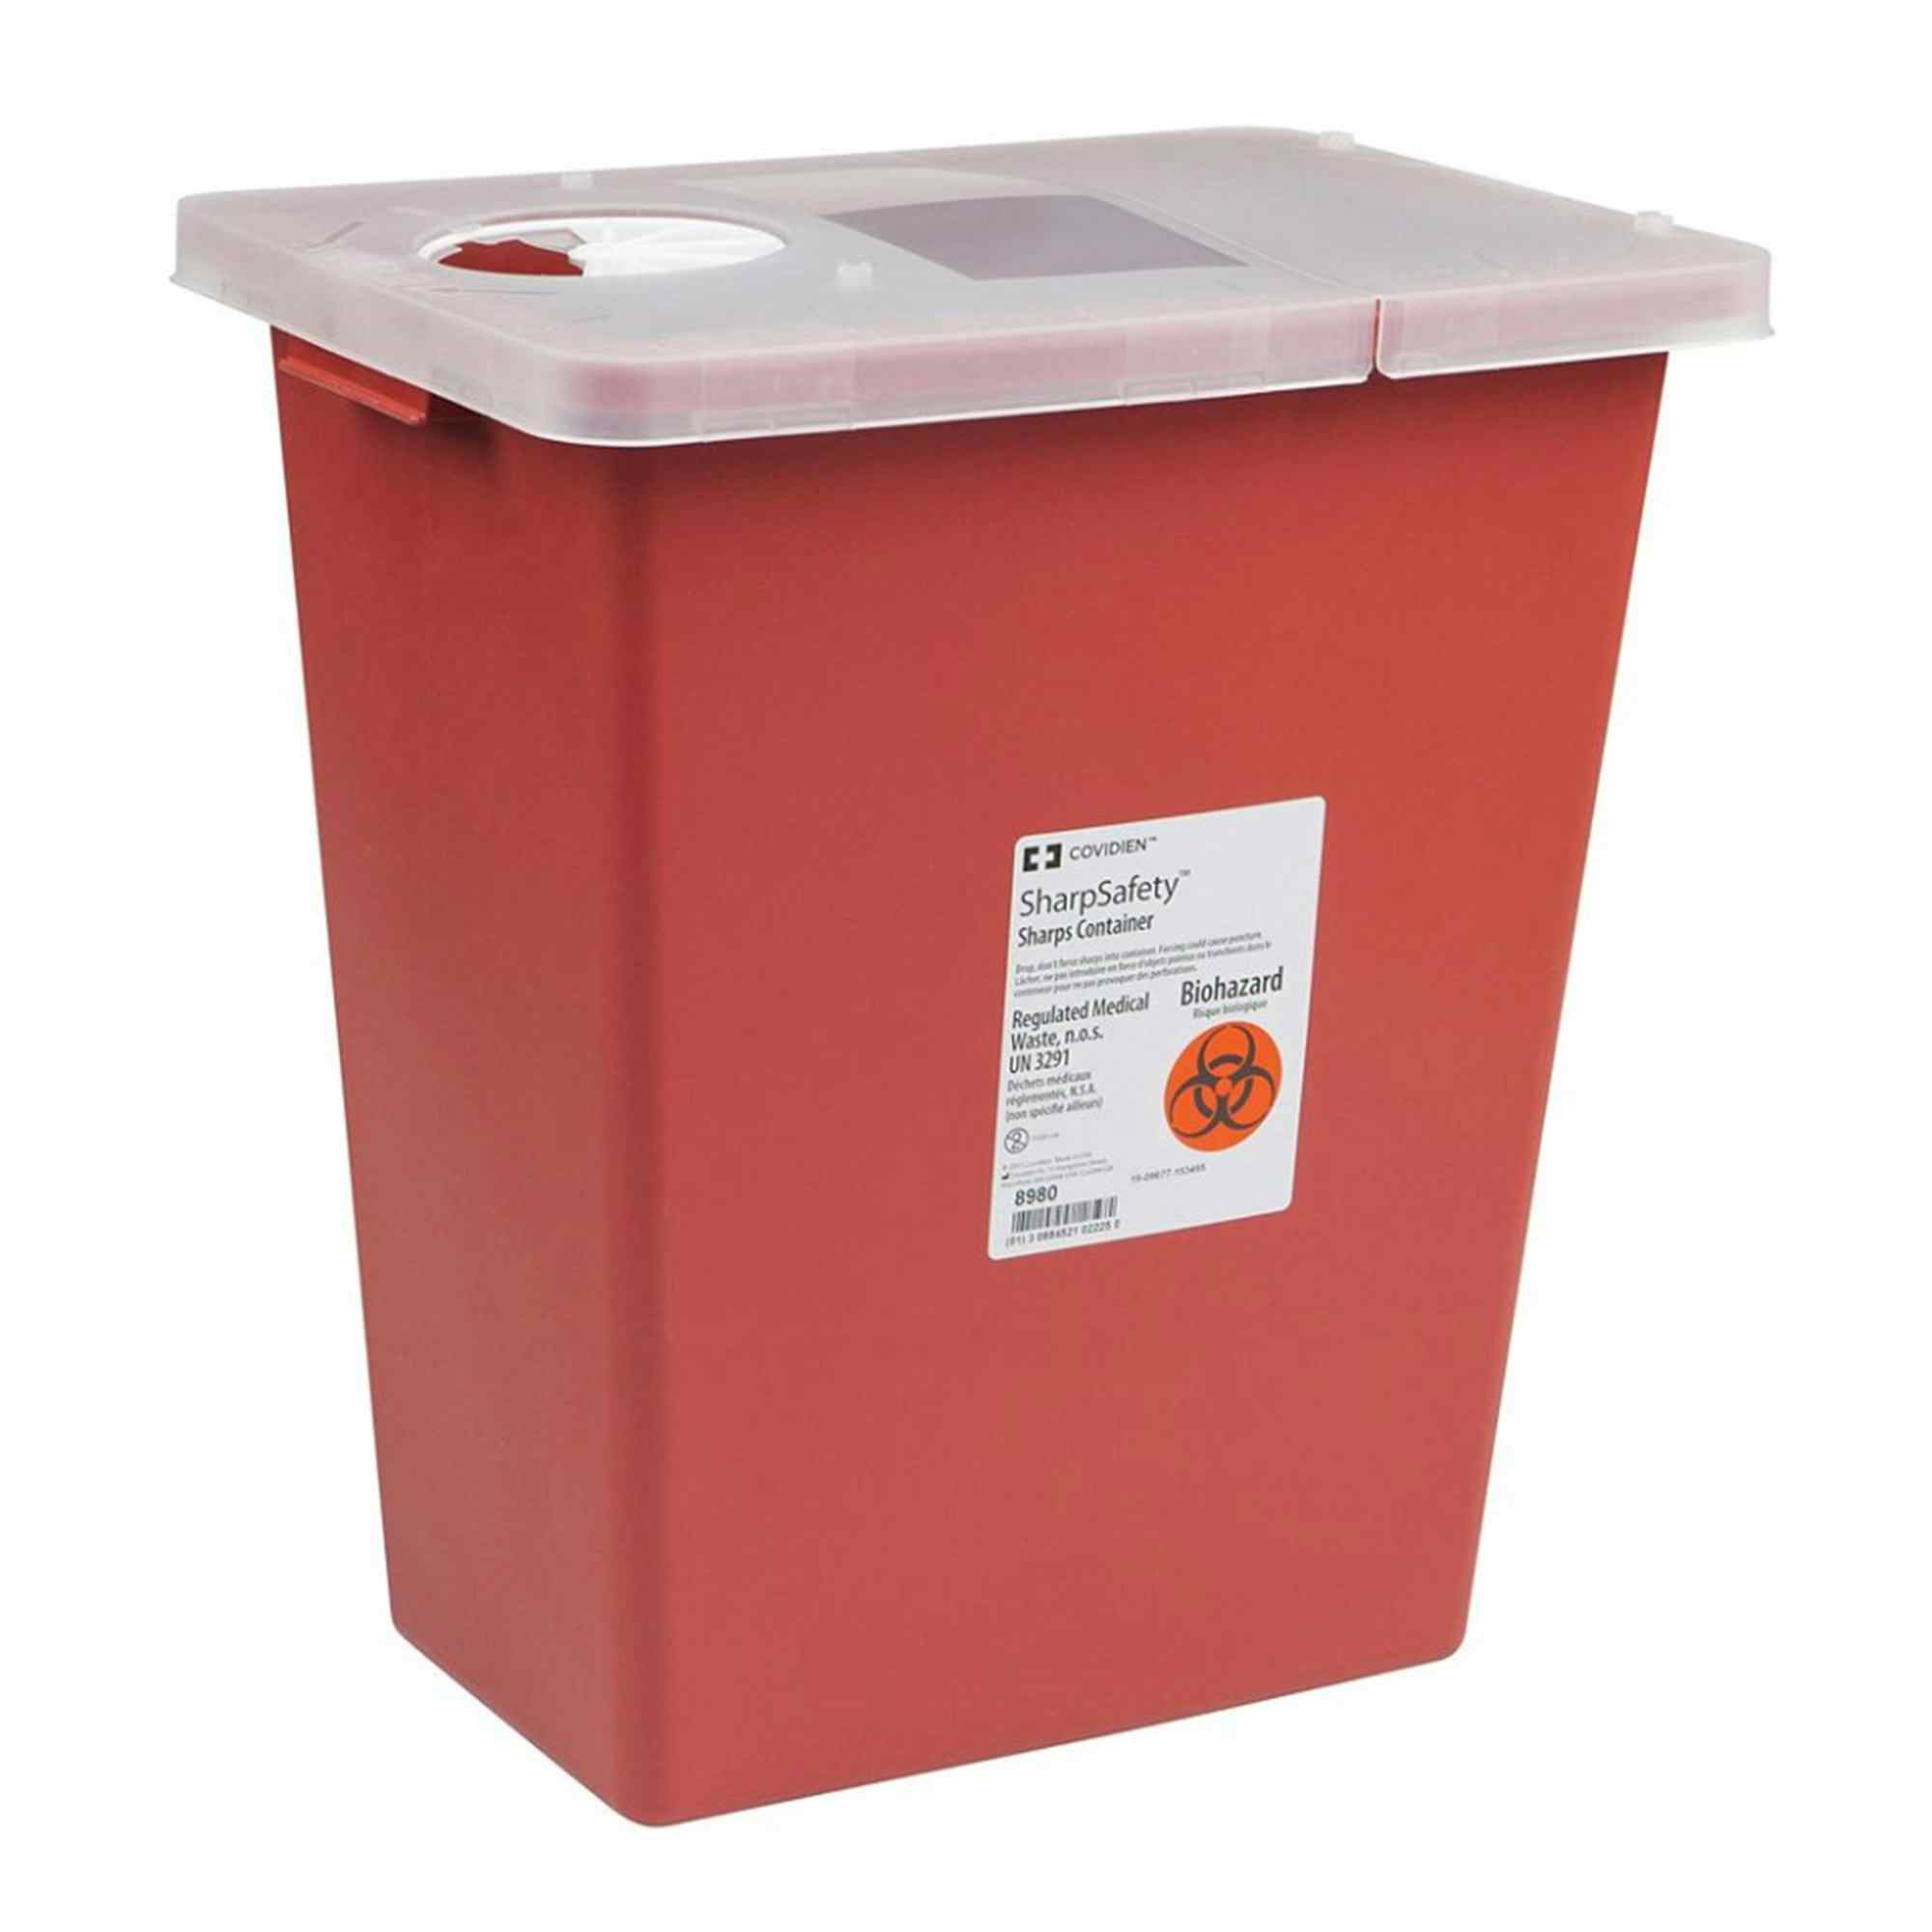 Cardinal SharpSafety Sharps Container, Hinged Lid, 8 gal, 8980-, 1 Each